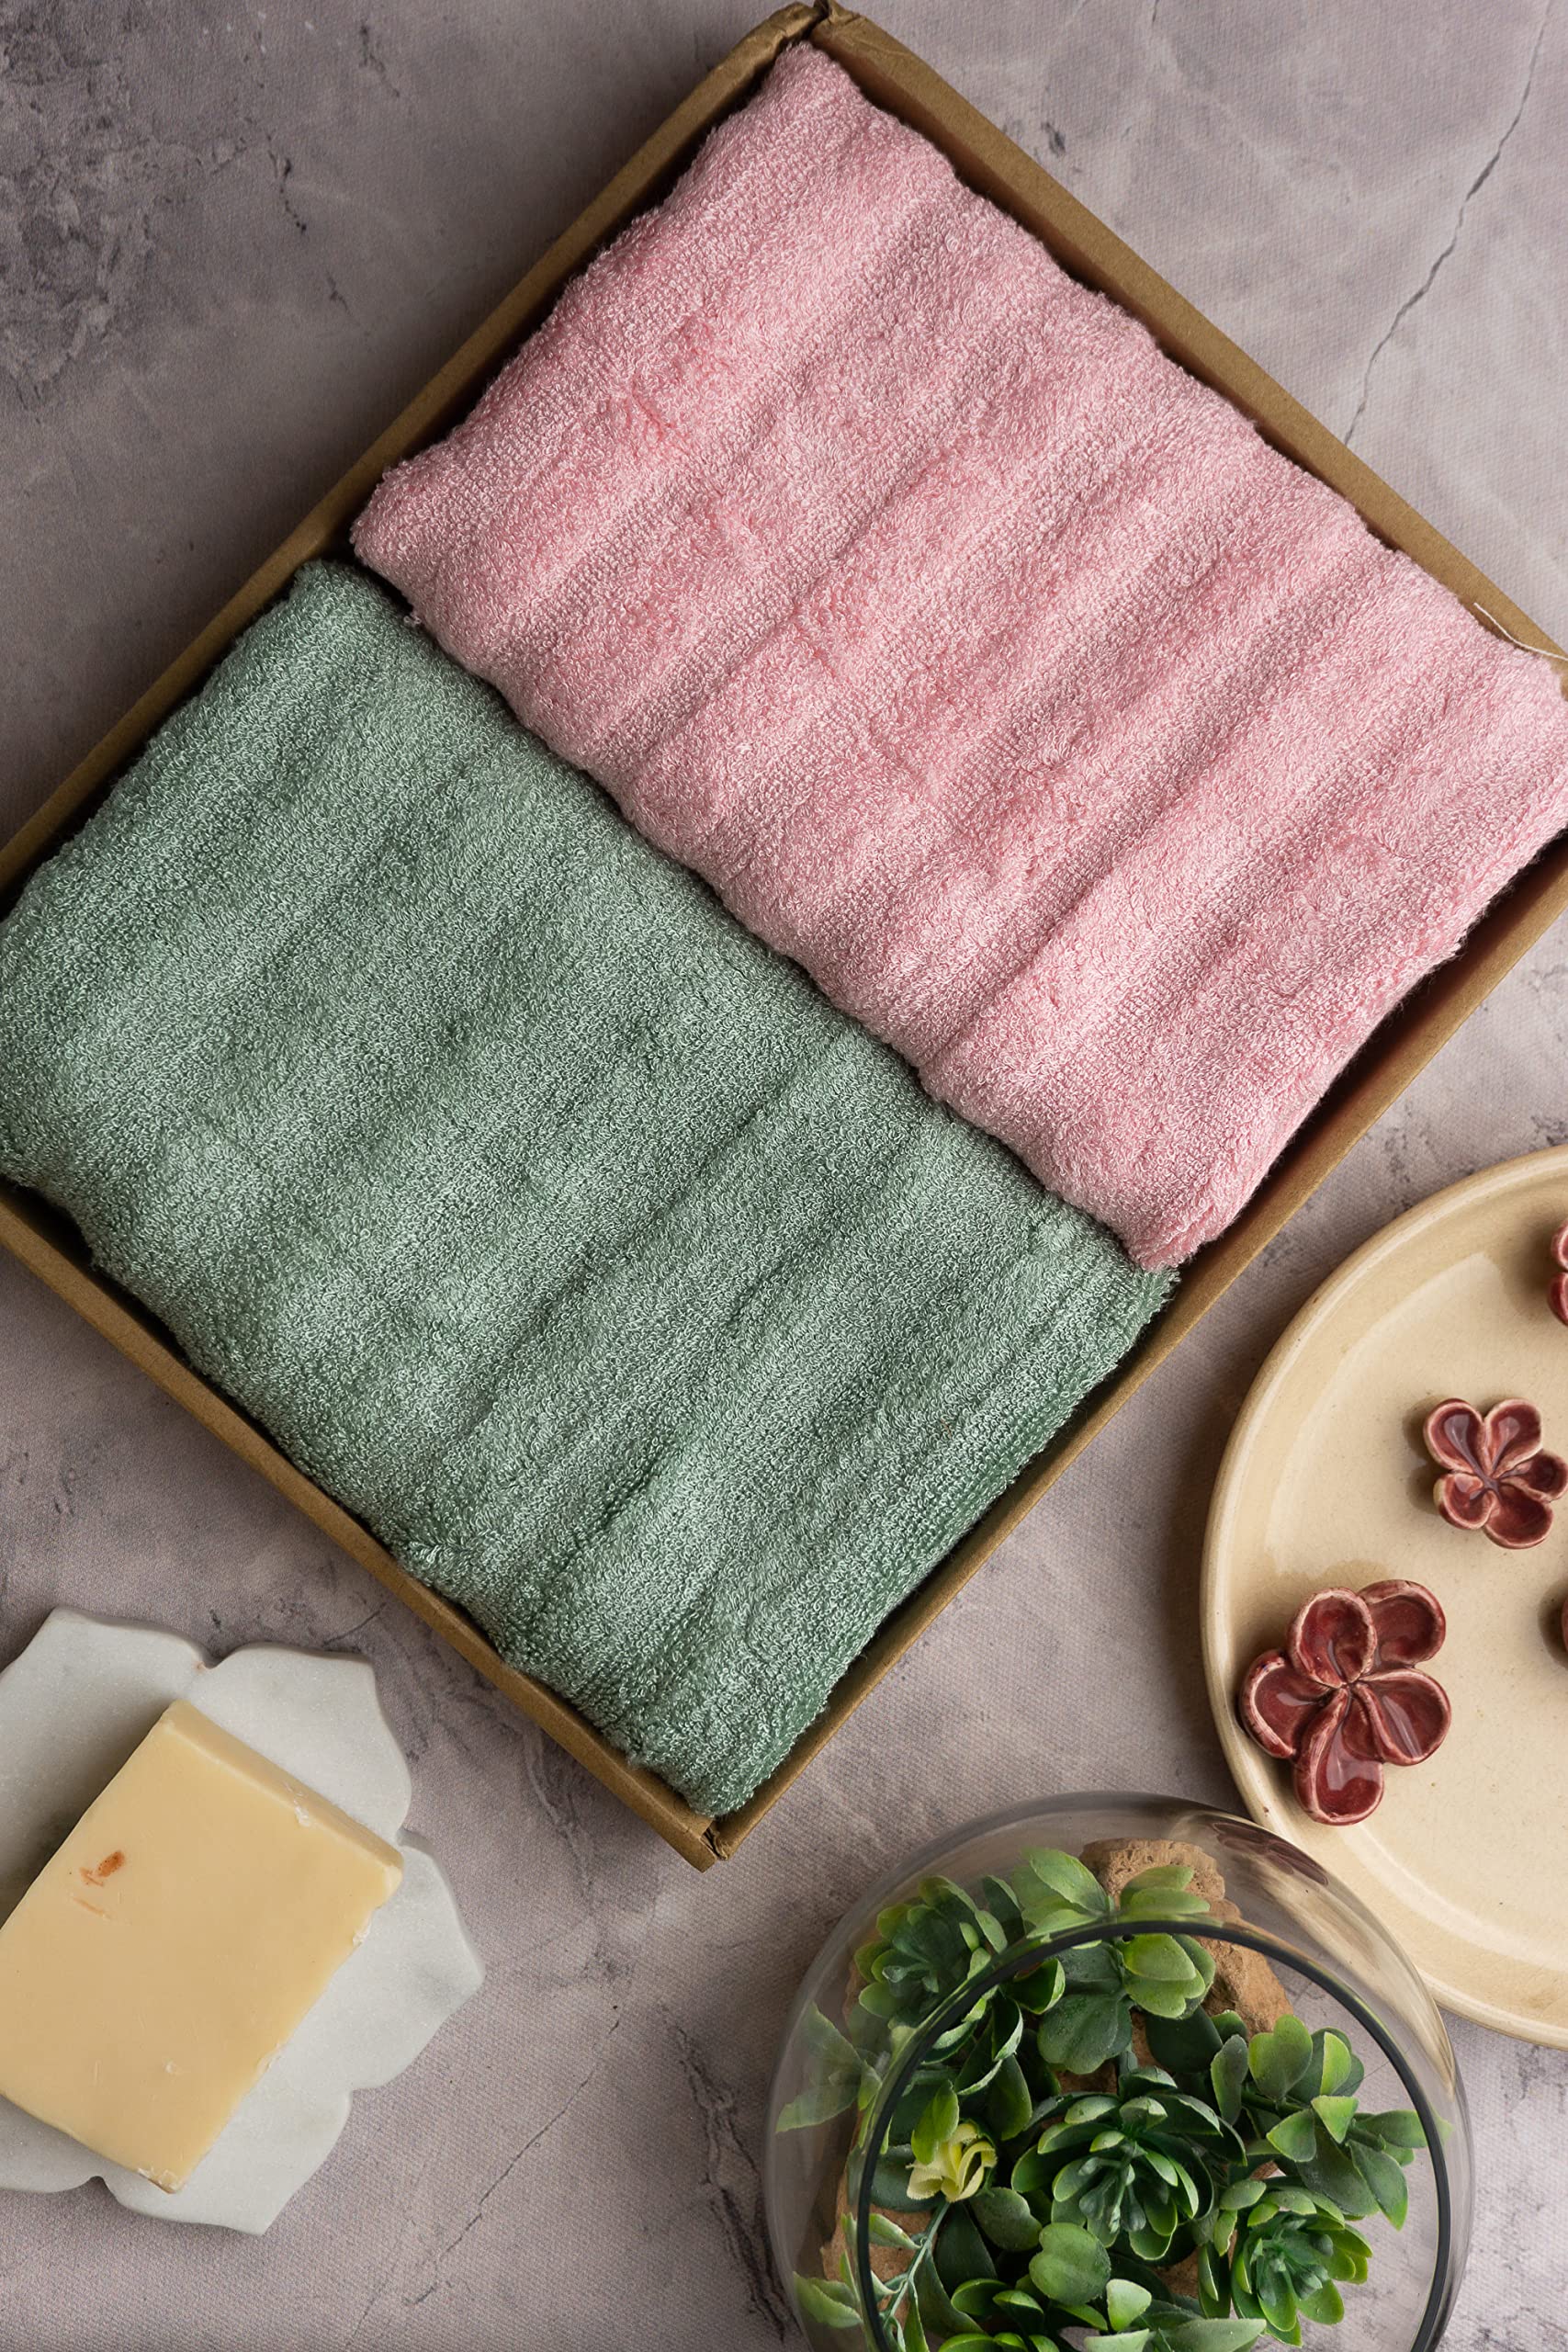 Mush Bamboo Hand Towel Set of 2 | 100% Bamboo | Ultra Soft, Absorbent & Quick Dry Towel for Daily use. Gym, Pool, Travel, Sports and Yoga | 75 X 35 cms | 600 GSM (Green & Pink)